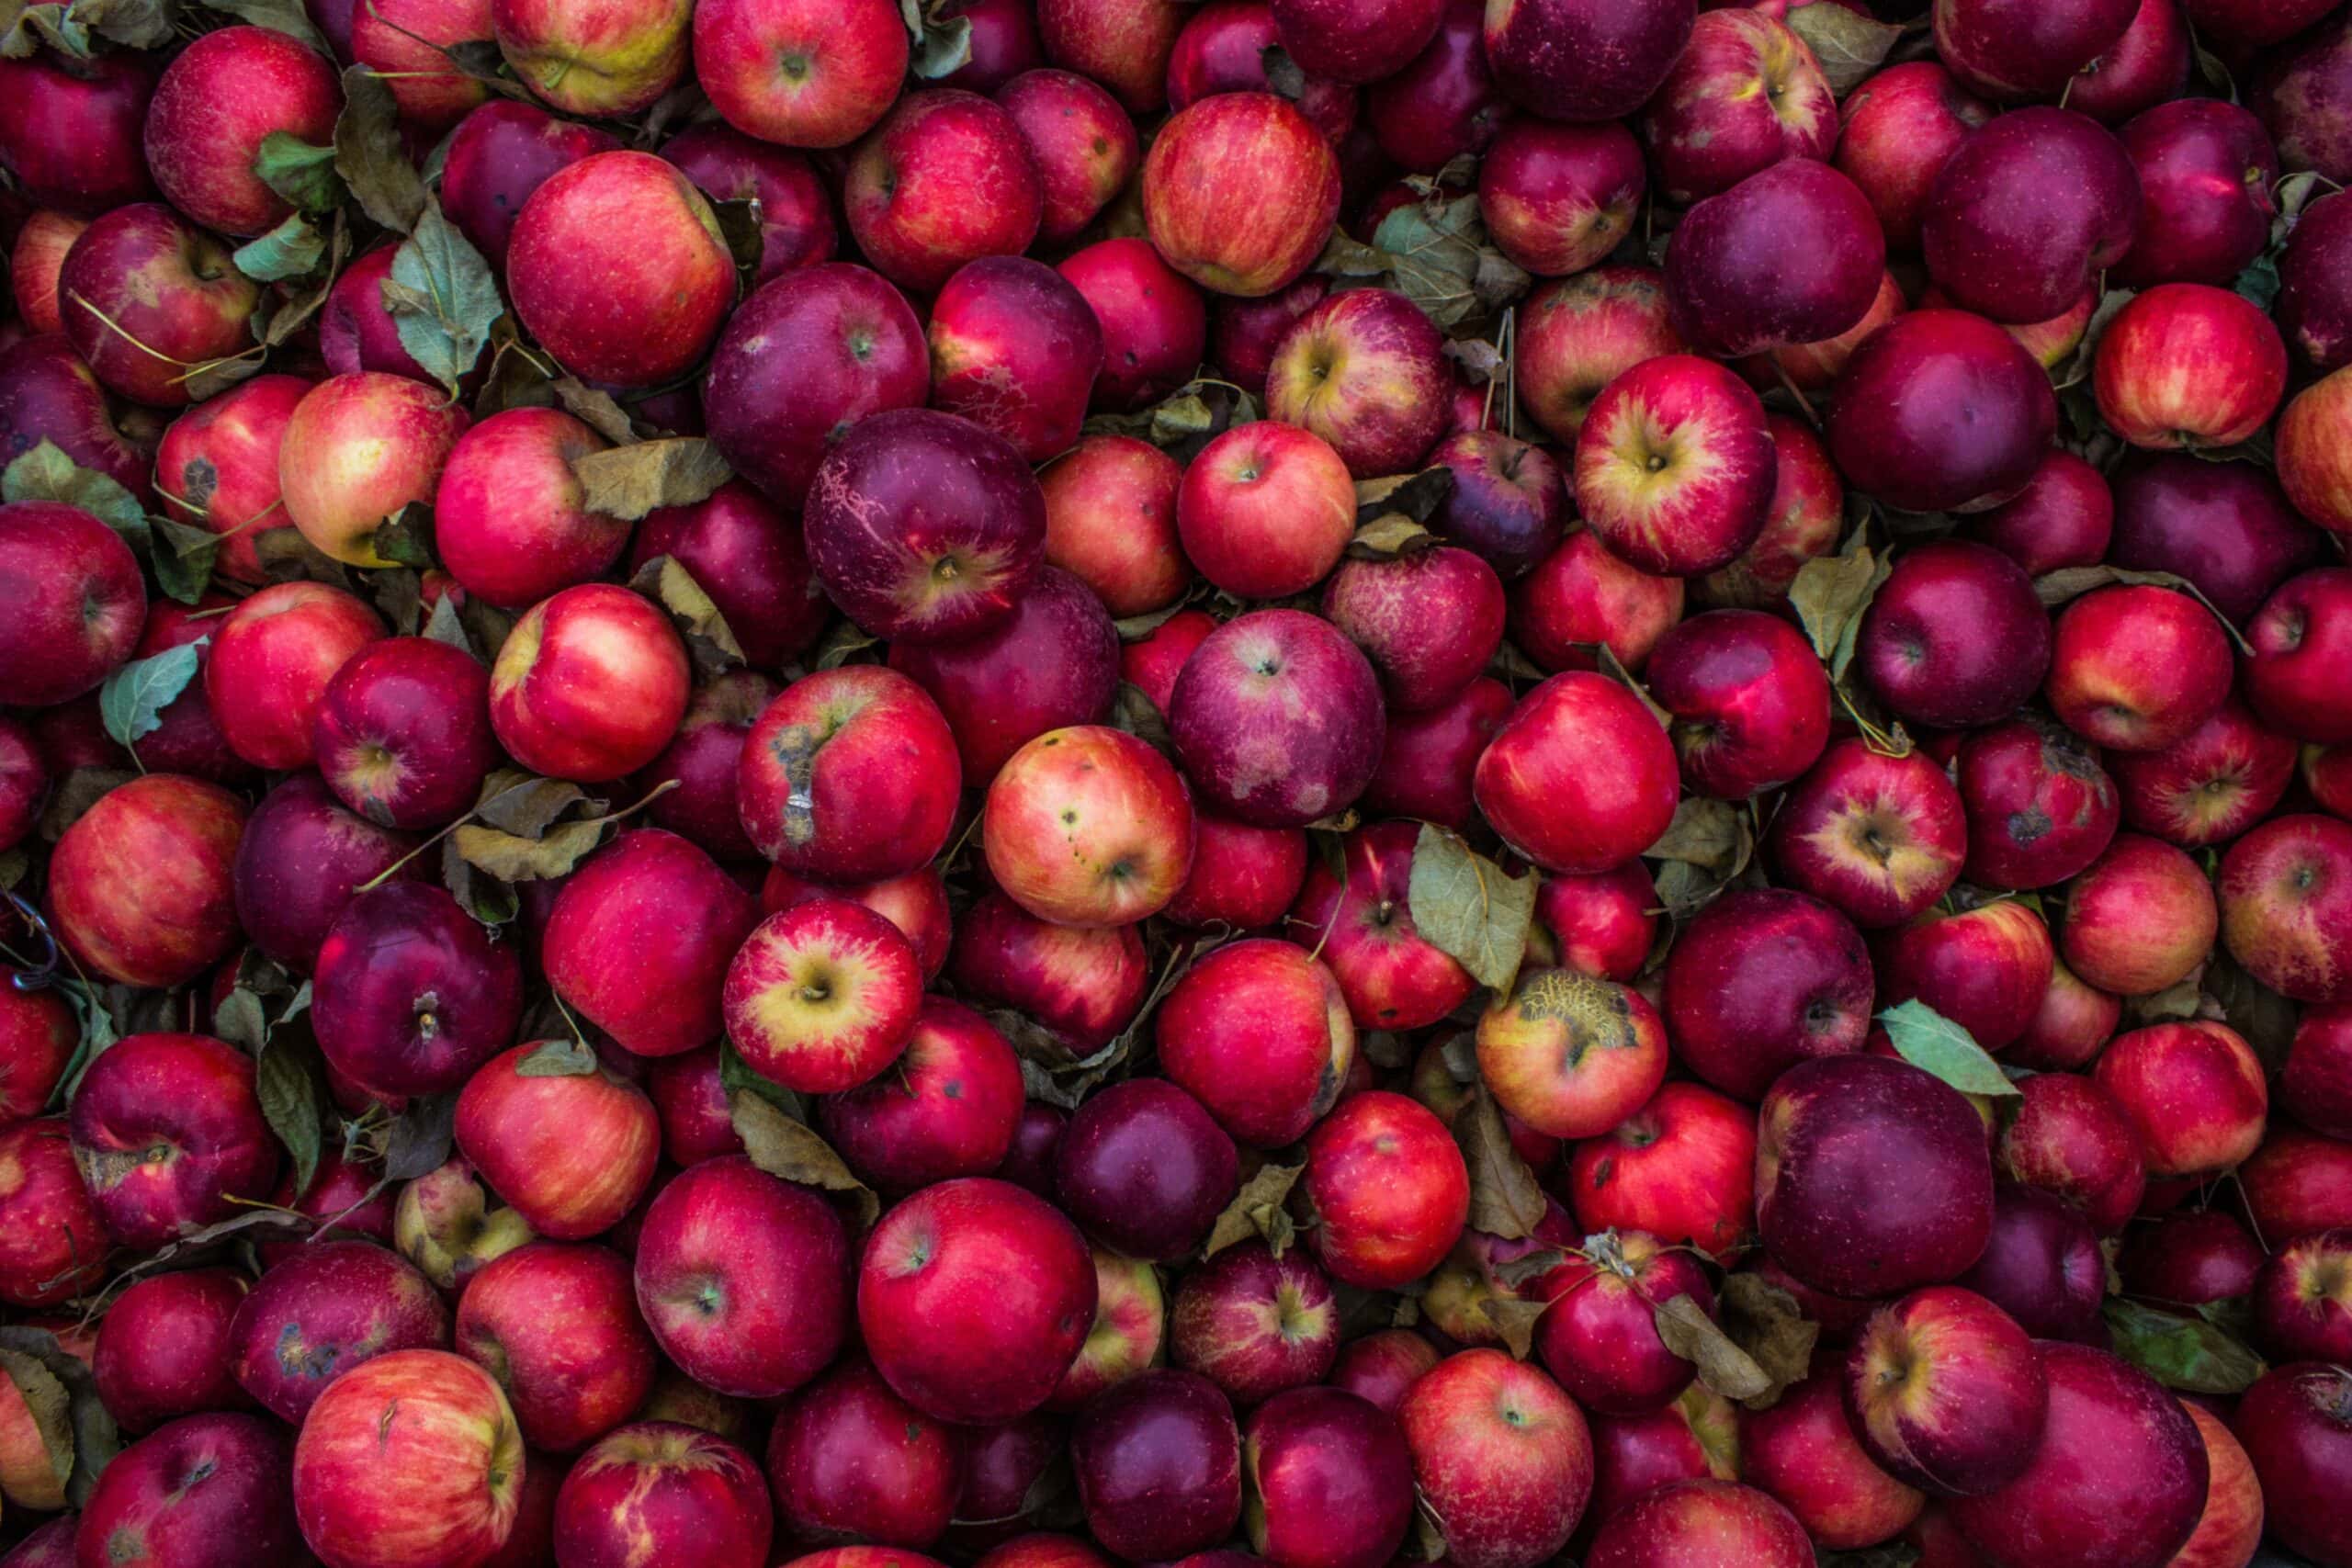 A pile of red apples with leaves on them.